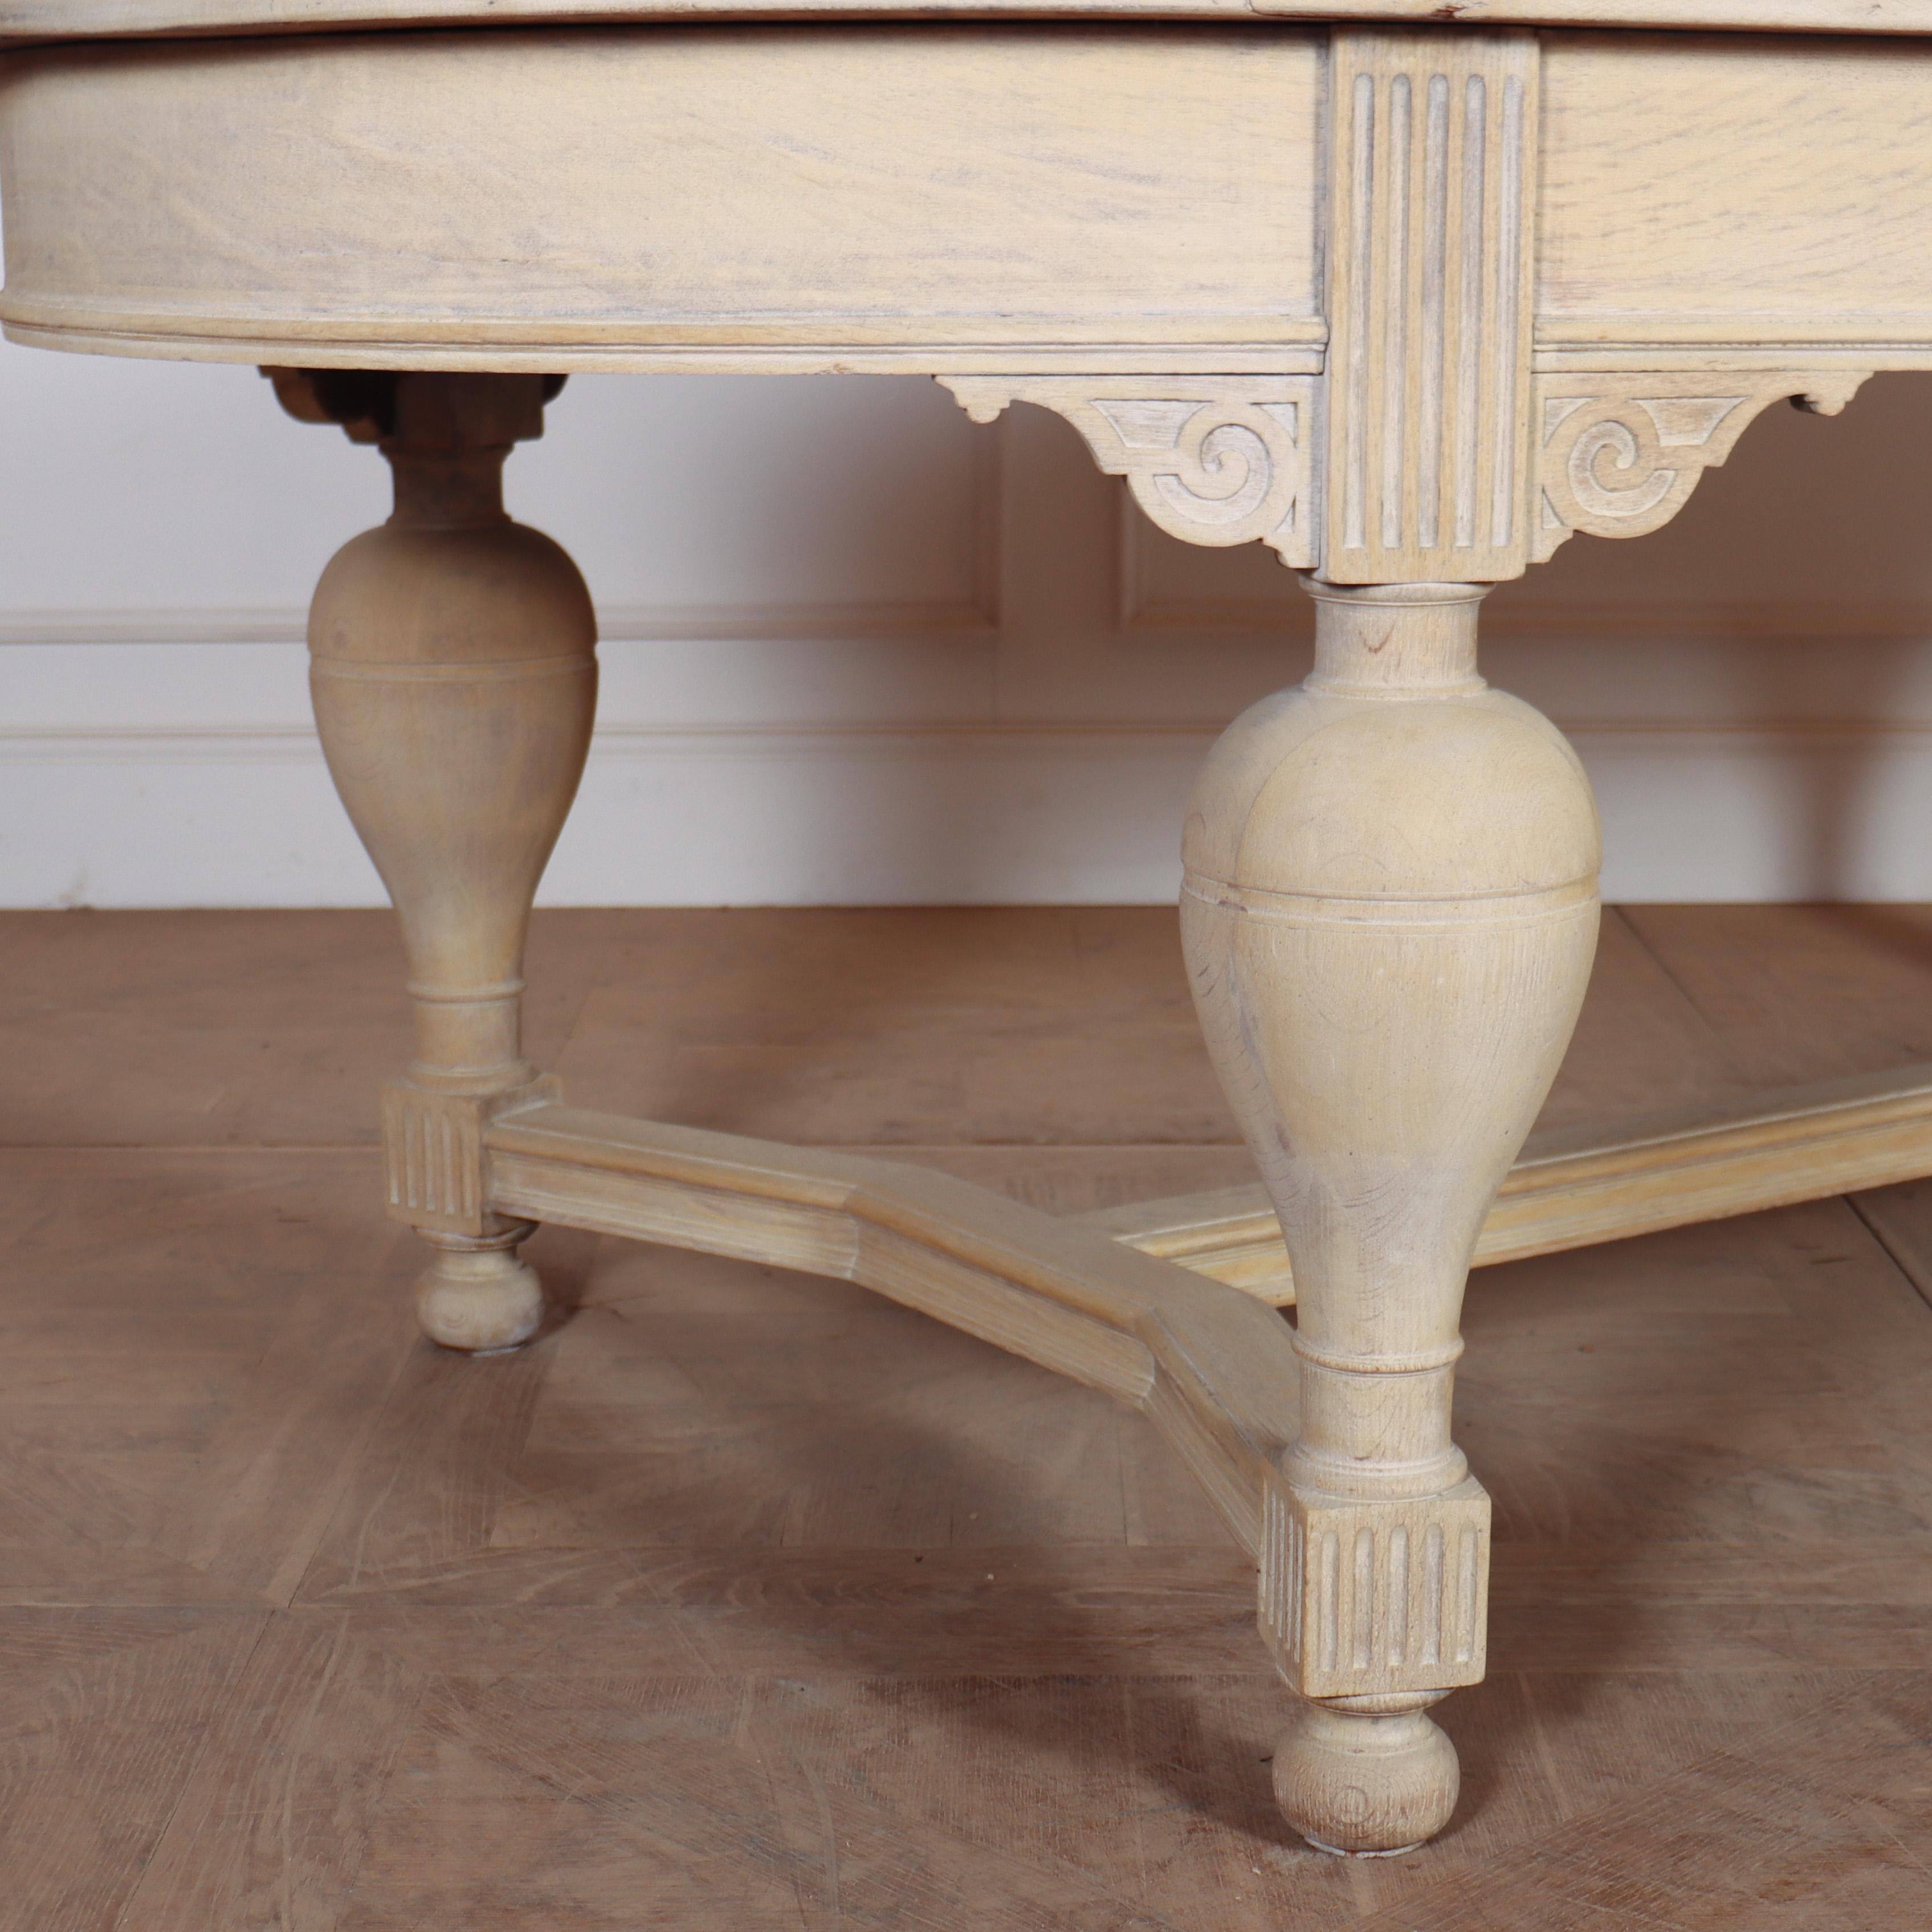 Large late 19th C Dutch bleached oak oval dining table. 1880.

Reference: 8010

Dimensions
91 inches (231 cms) Wide
51 inches (130 cms) Deep
29.5 inches (75 cms) High